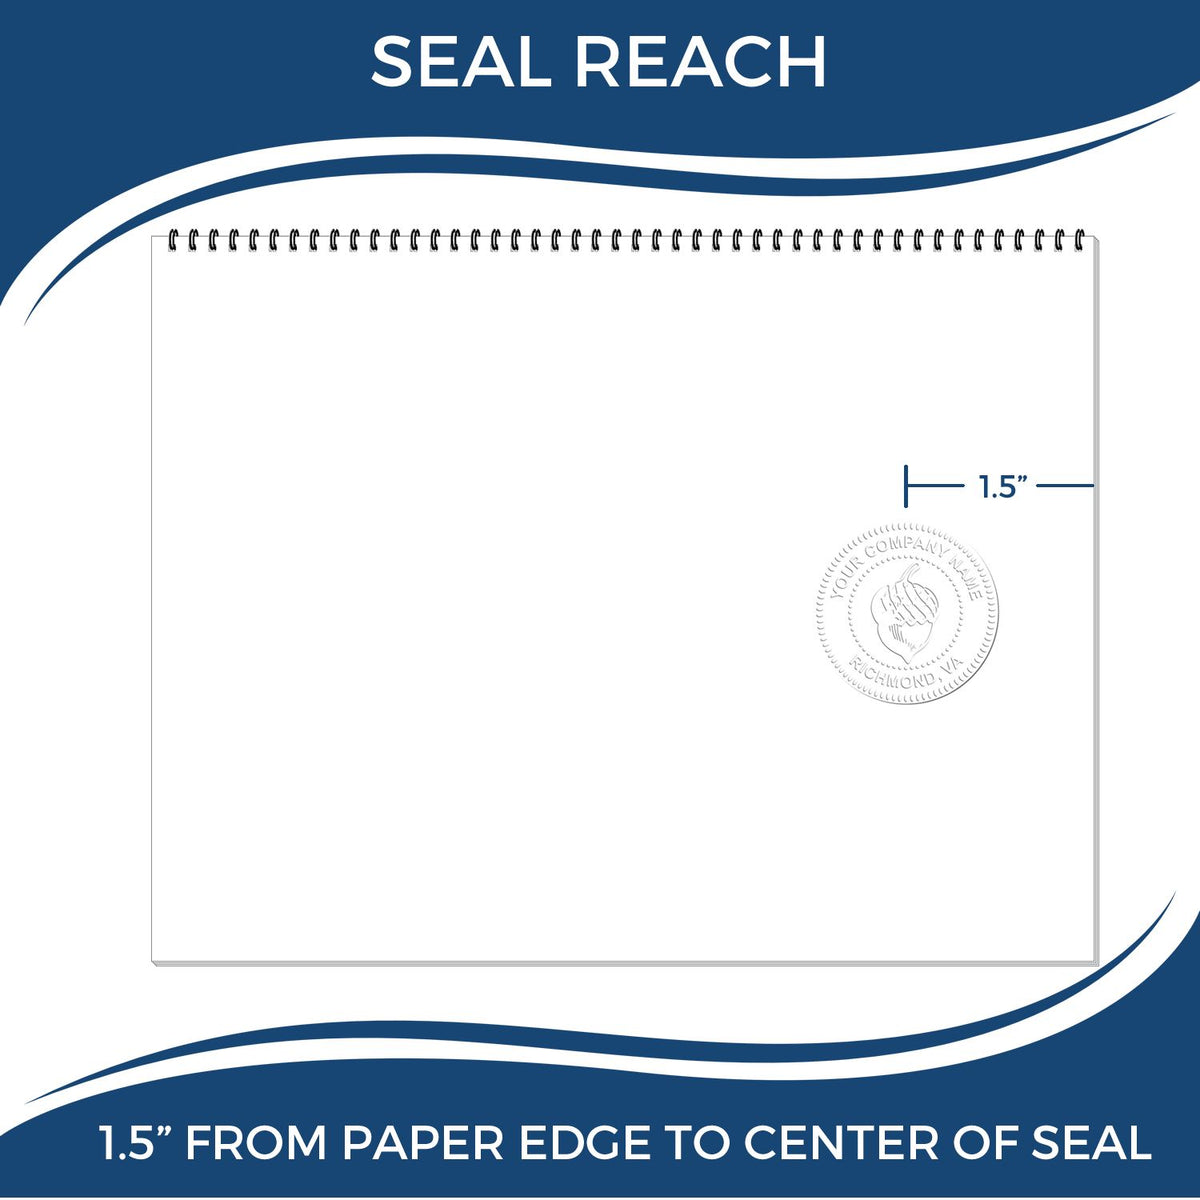 An infographic showing the seal reach which is represented by a ruler and a miniature seal image of the Iowa Geologist Desk Seal